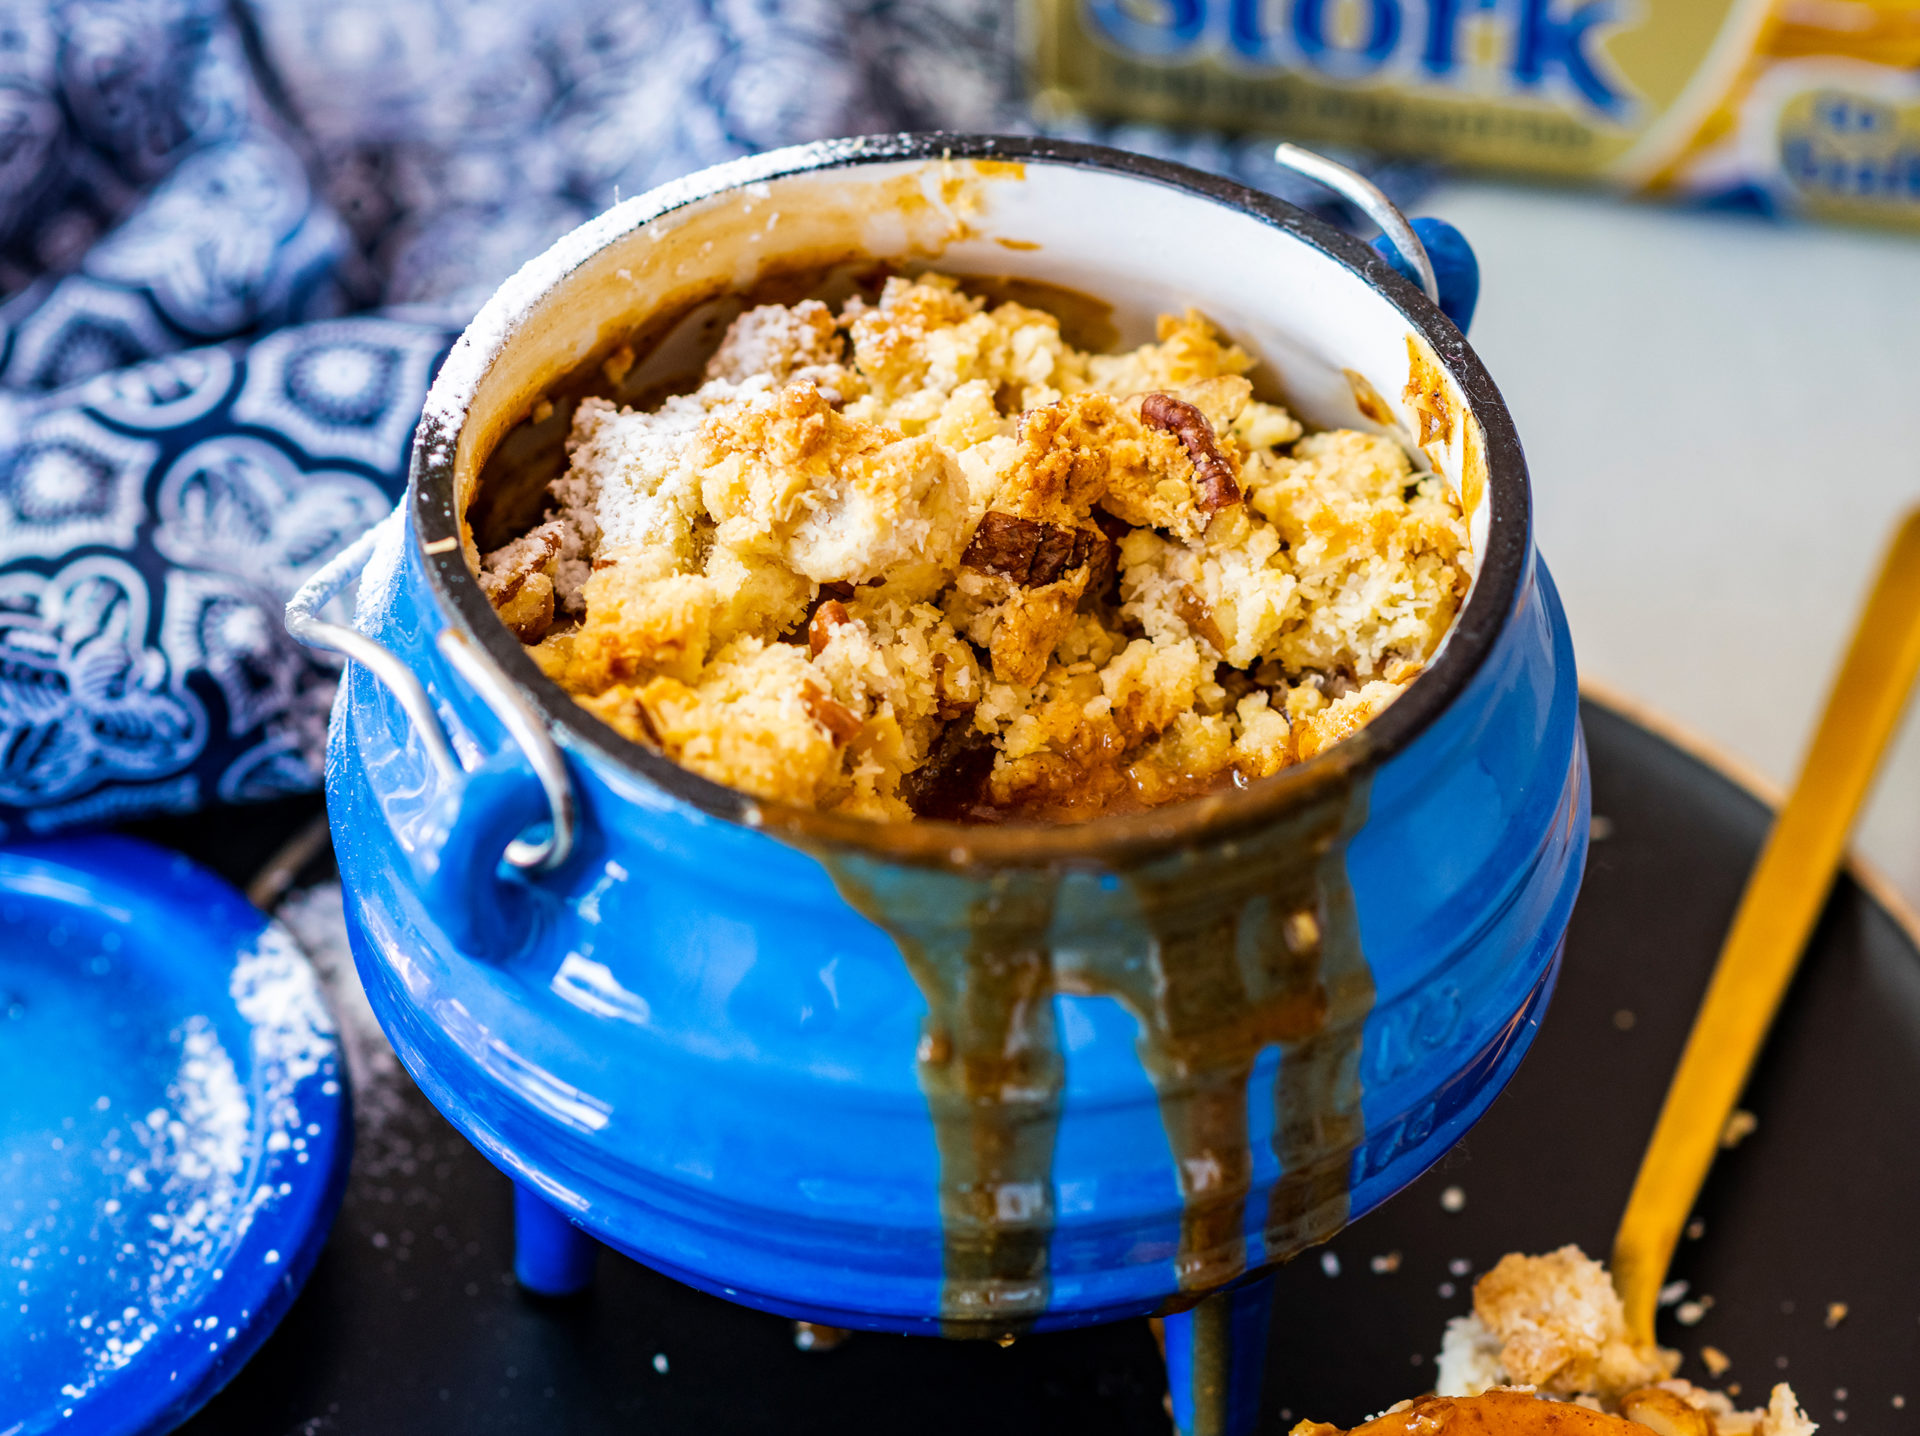 Salted Caramel Apple Crumble Potjie Recipe | Bake with Stork